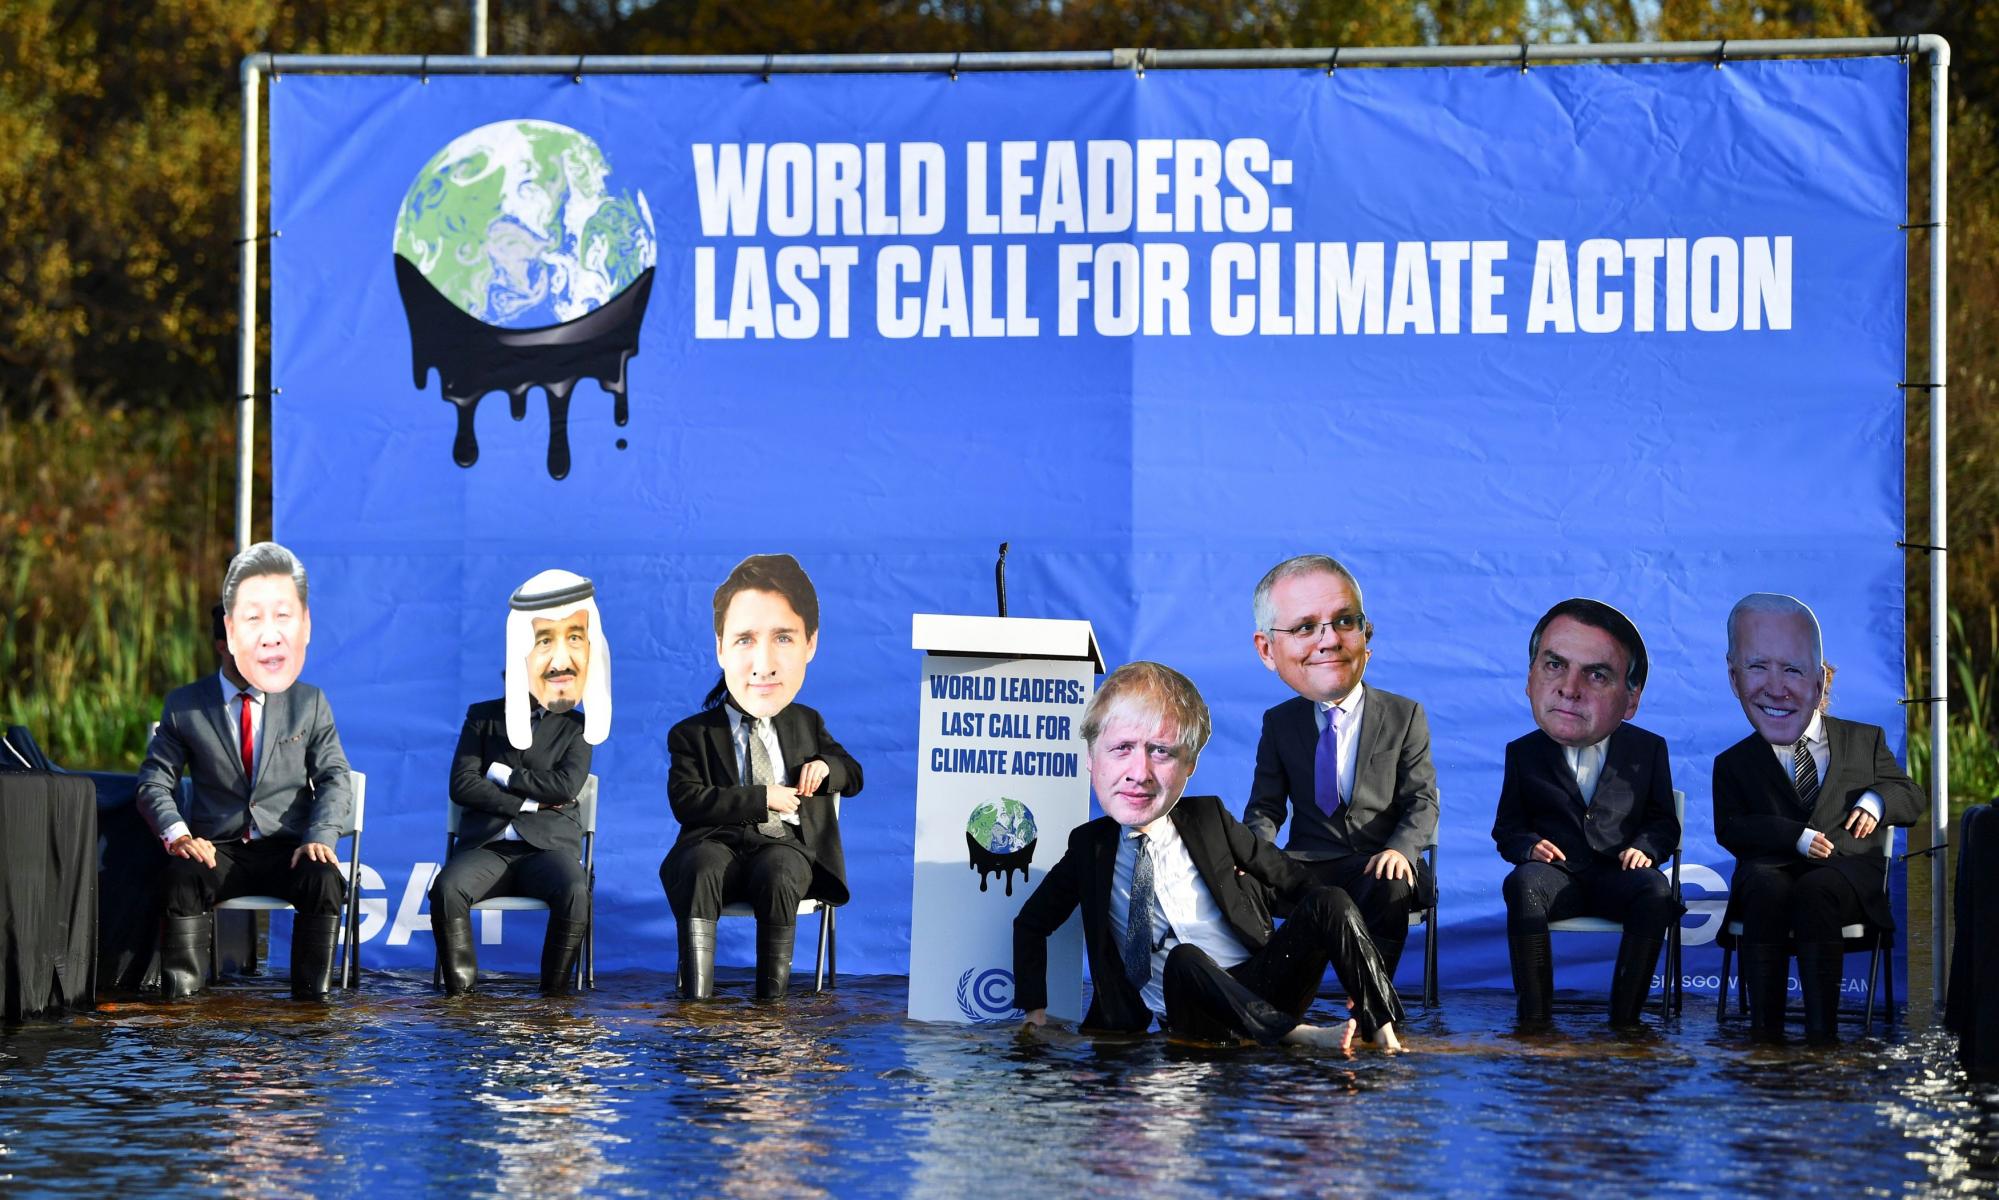 Current policies will bring ‘catastrophic’ climate breakdown, warn former UN leaders